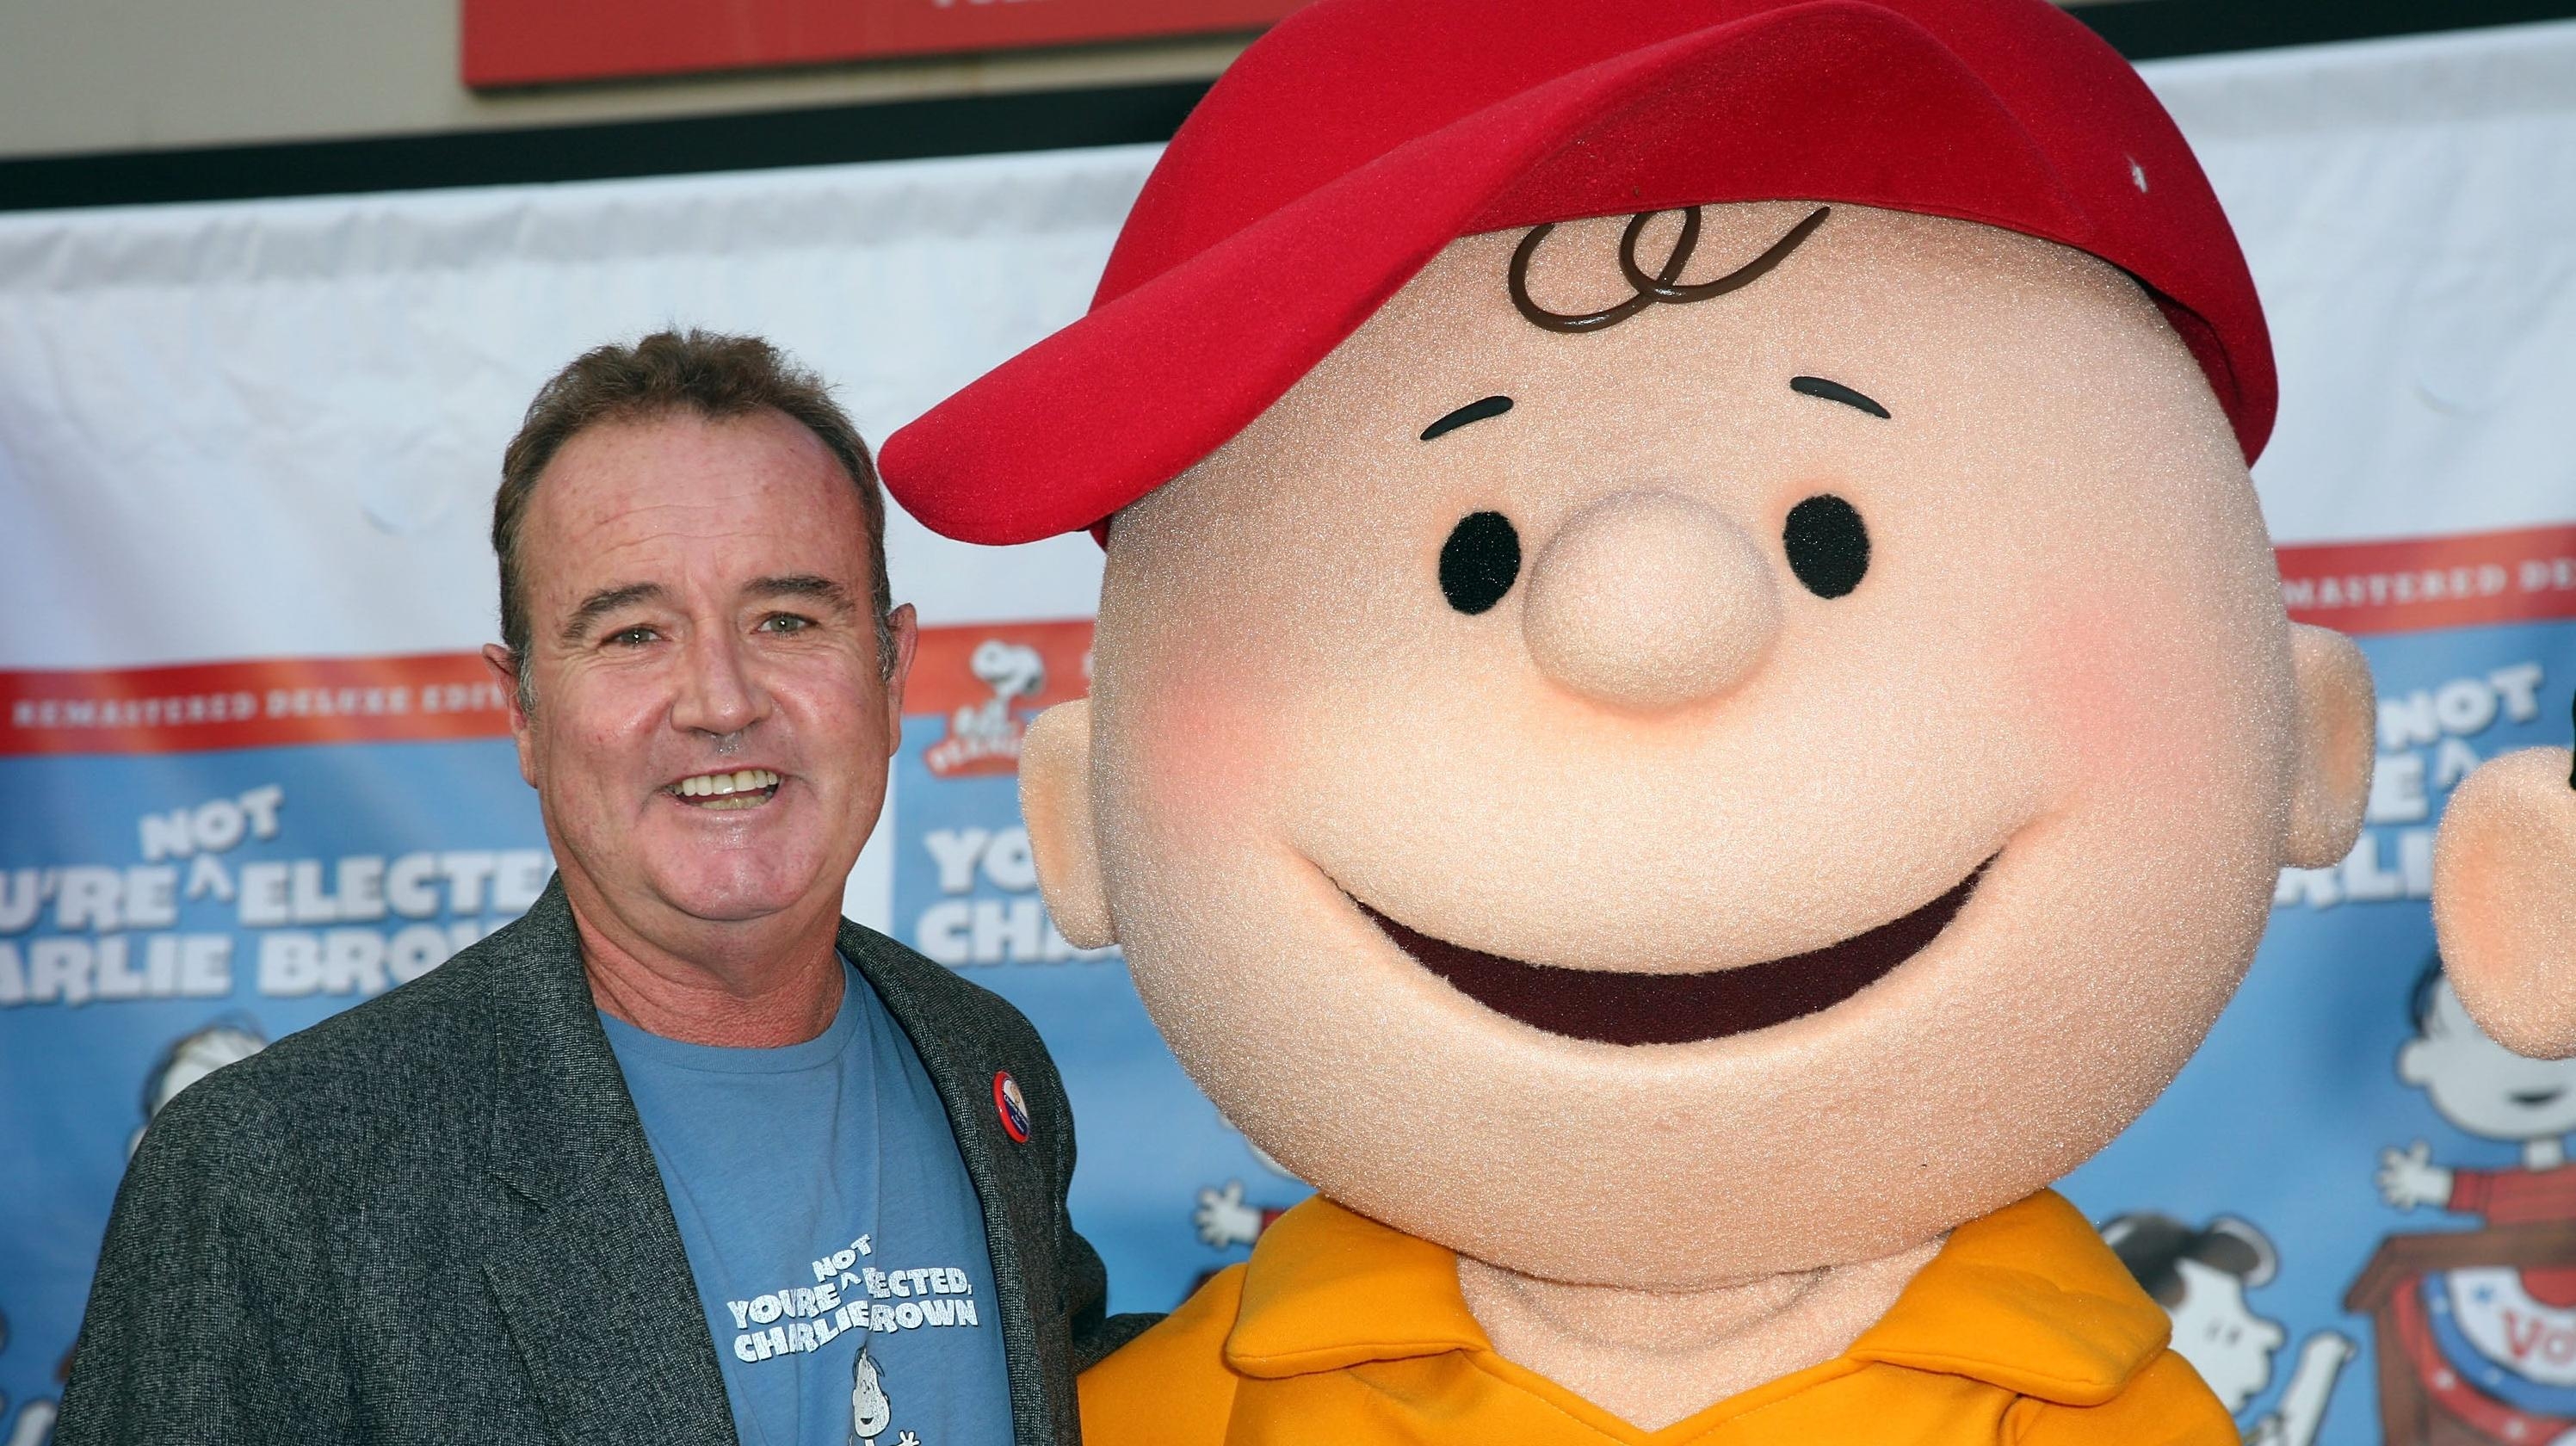 R.I.P. Peter Robbins, the original voice of Charlie Brown